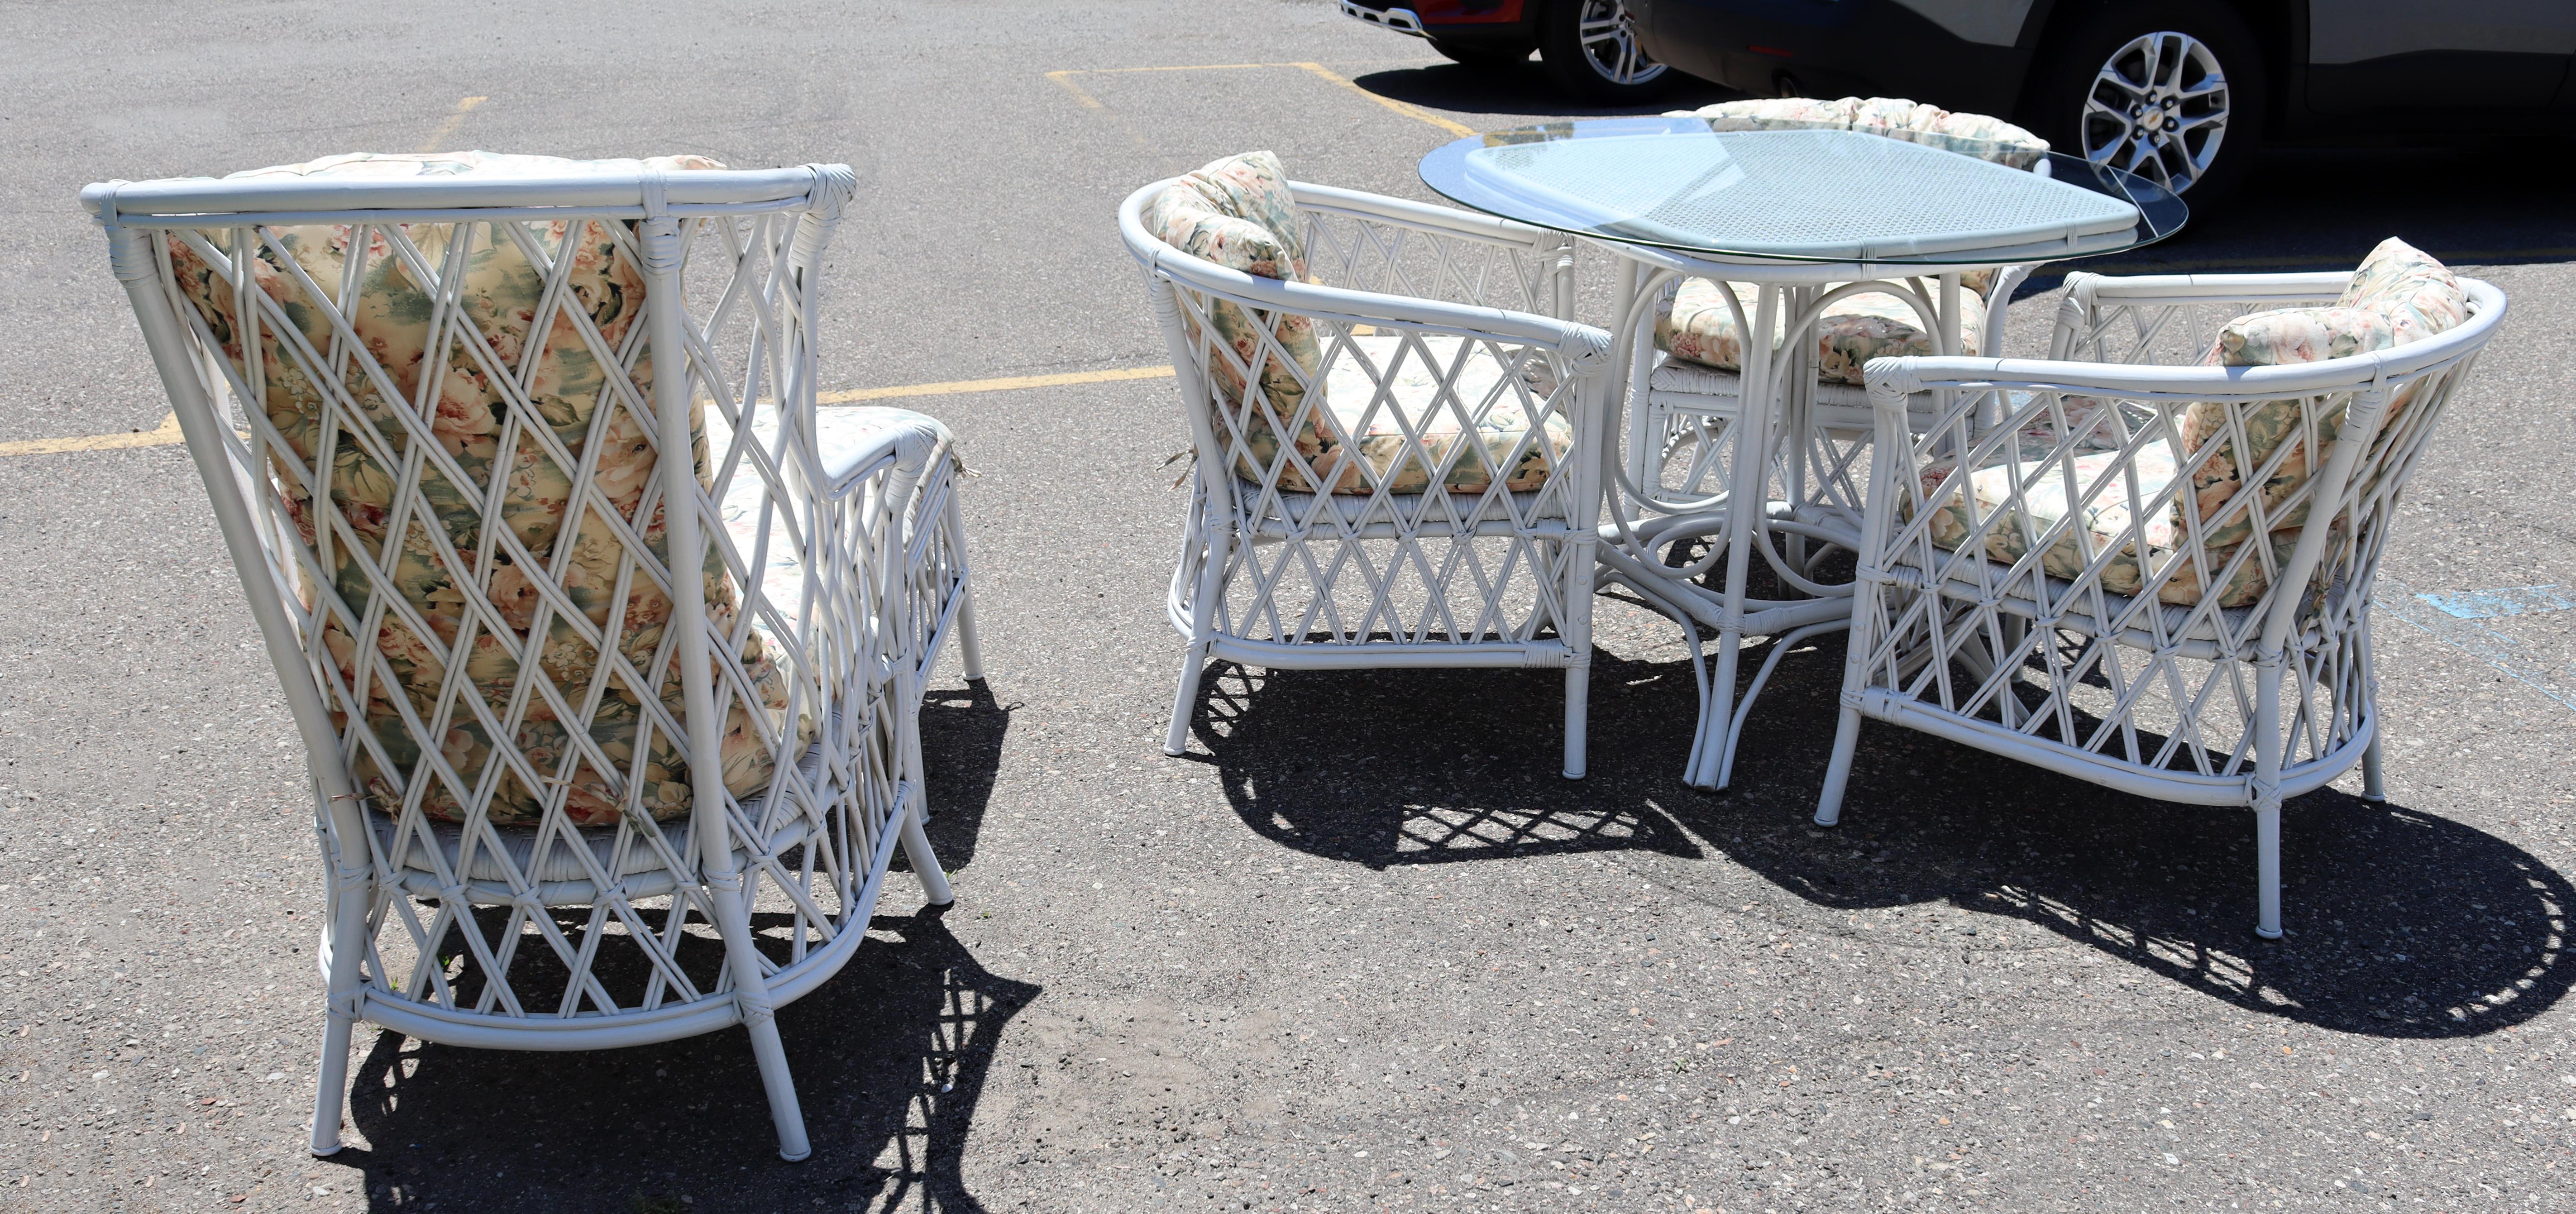 Contemporary Modern White Wicker Rattan Patio Dining Set Table Chairs Ottoman 1